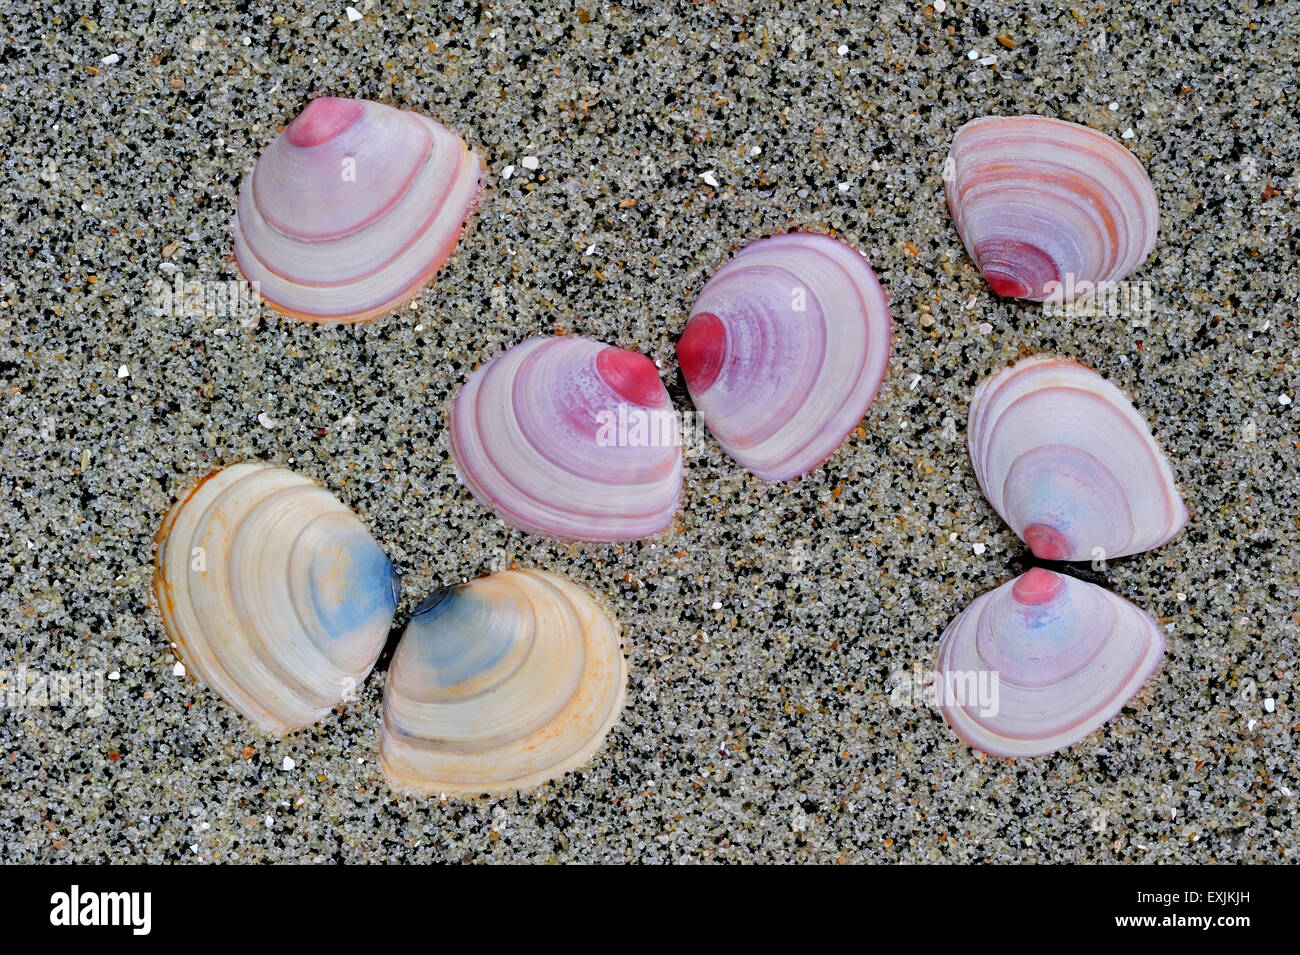 Baltic macoma / Baltic clam / Baltic tellin (Macoma balthica) shells washed on beach Stock Photo